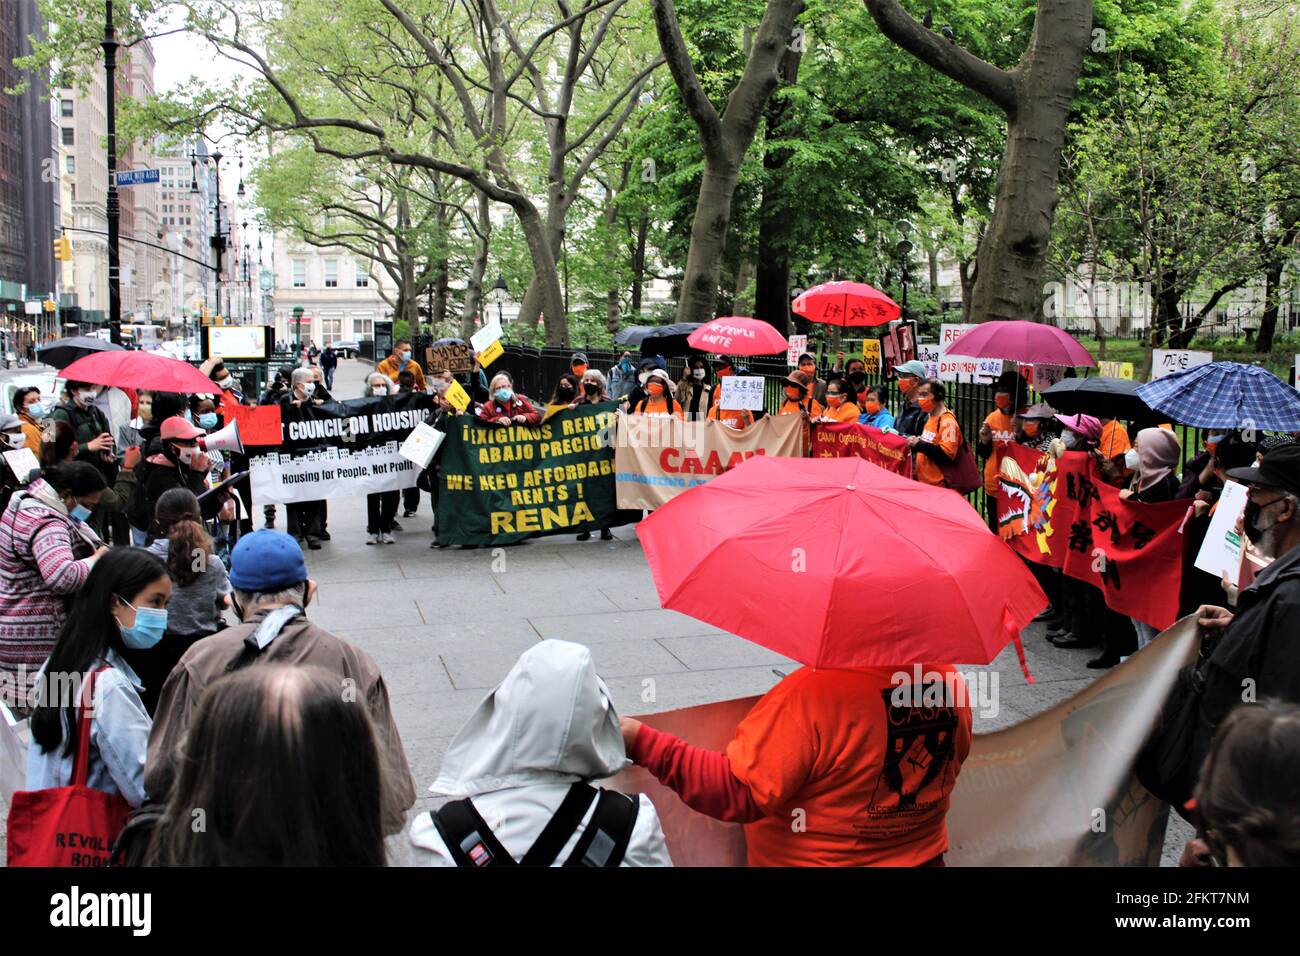 New York, USA. 03rd May, 2021 - NYC communities rally for 'RENT ROLLBACK' outside New York City Hall,  across from 250 Broadway 2 days before RGB (Rent Guidelines Board) holds their preliminary vote on May 5th 2021. Credit: Mark Apollo/Alamy Livenews Stock Photo